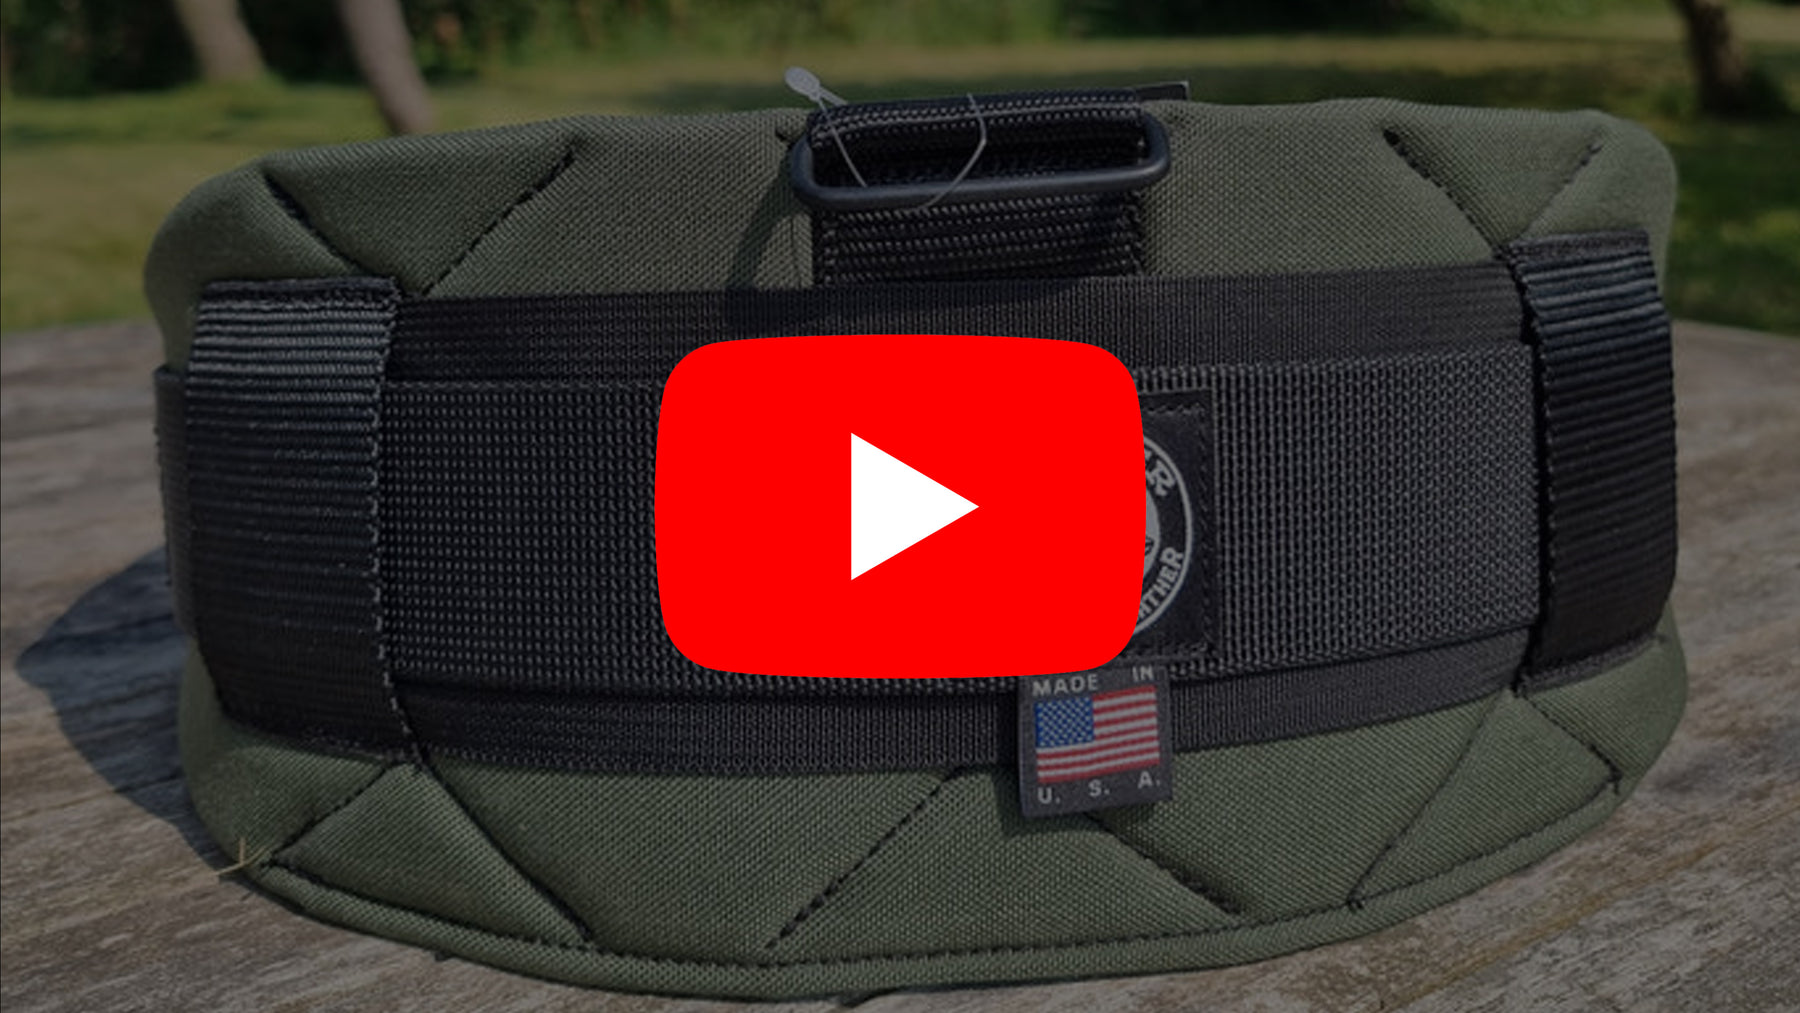 New YouTube Video - Badger Belts - an overview - TF Tools Ltd